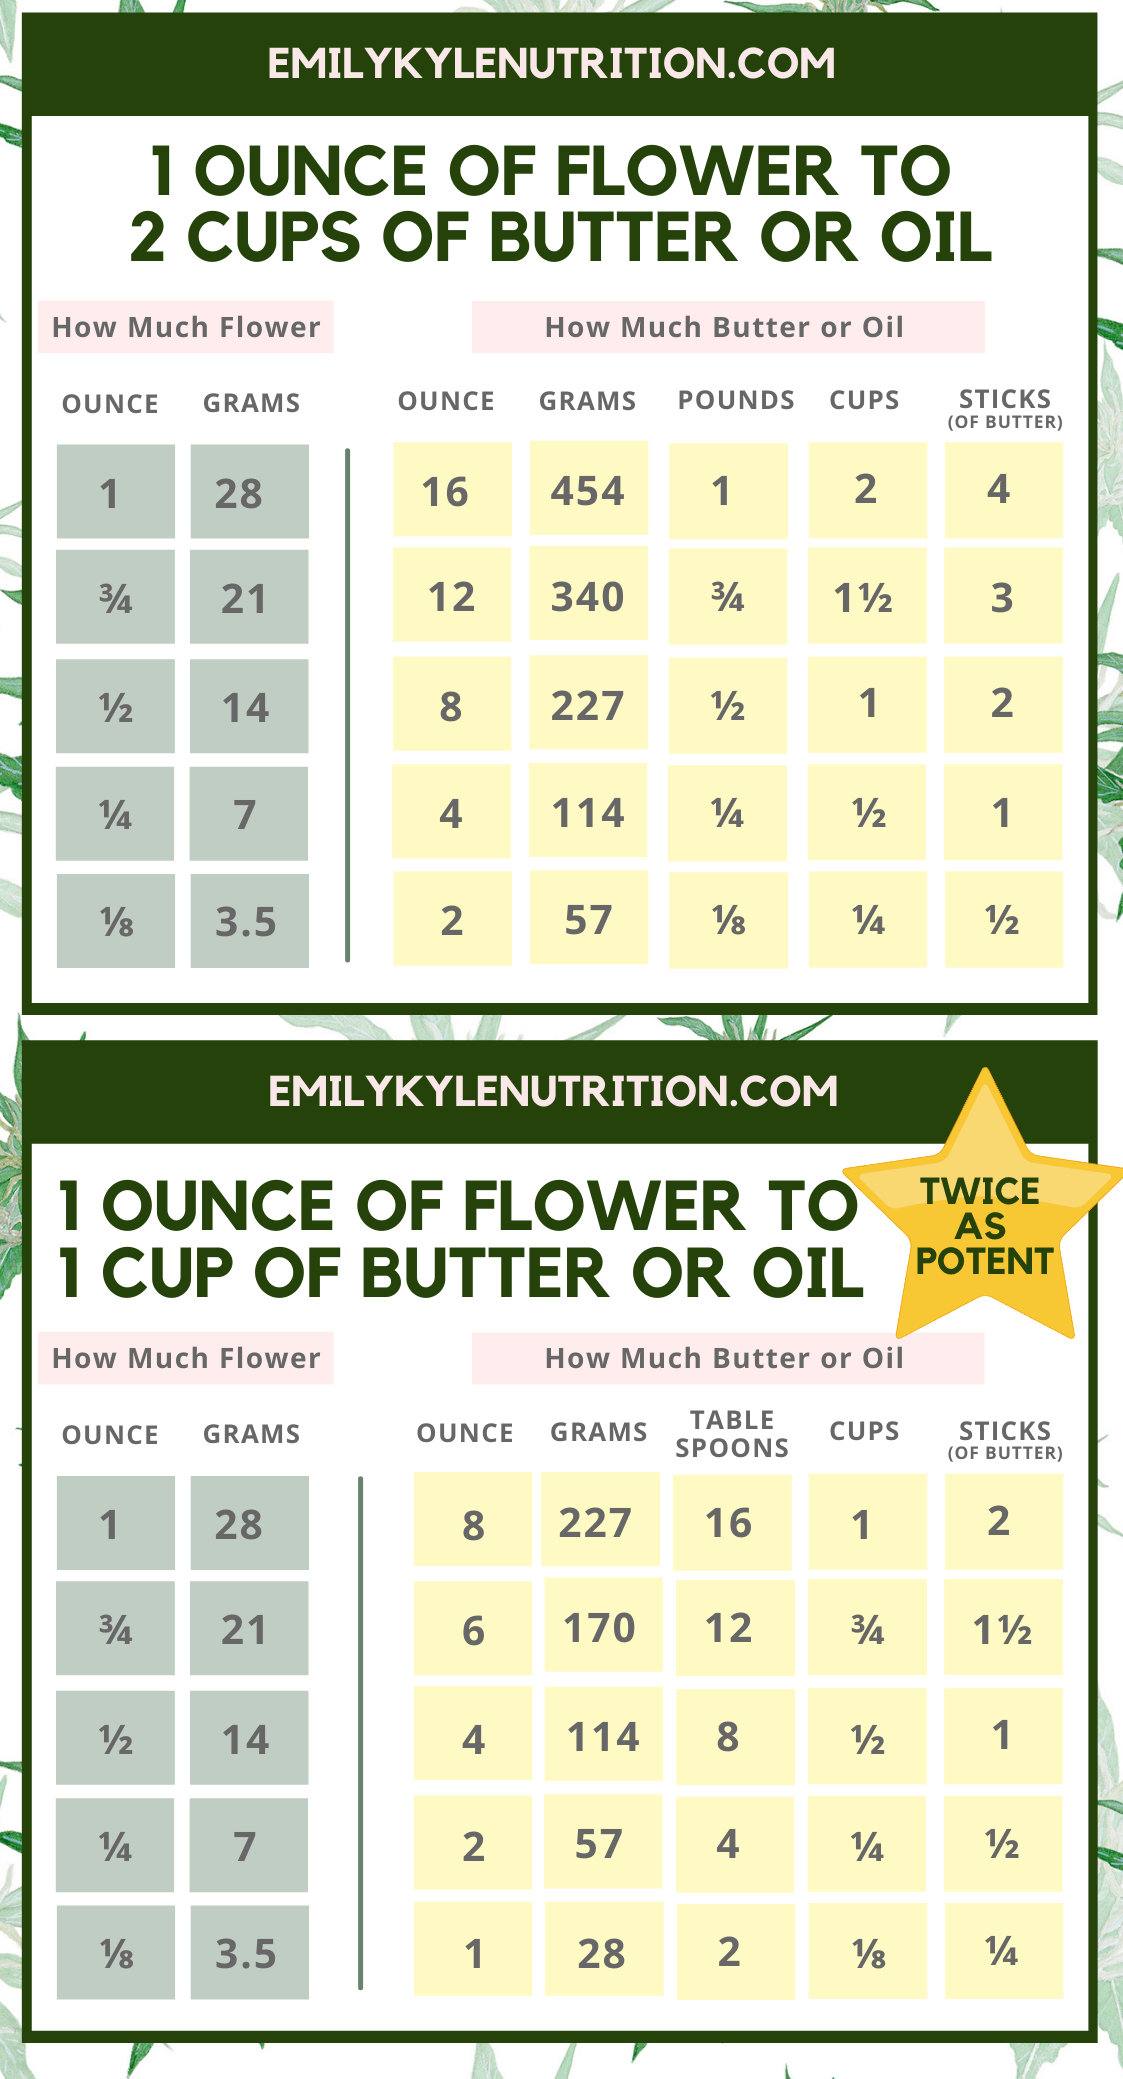 Cannabis Flower to Oil Ratio Guide